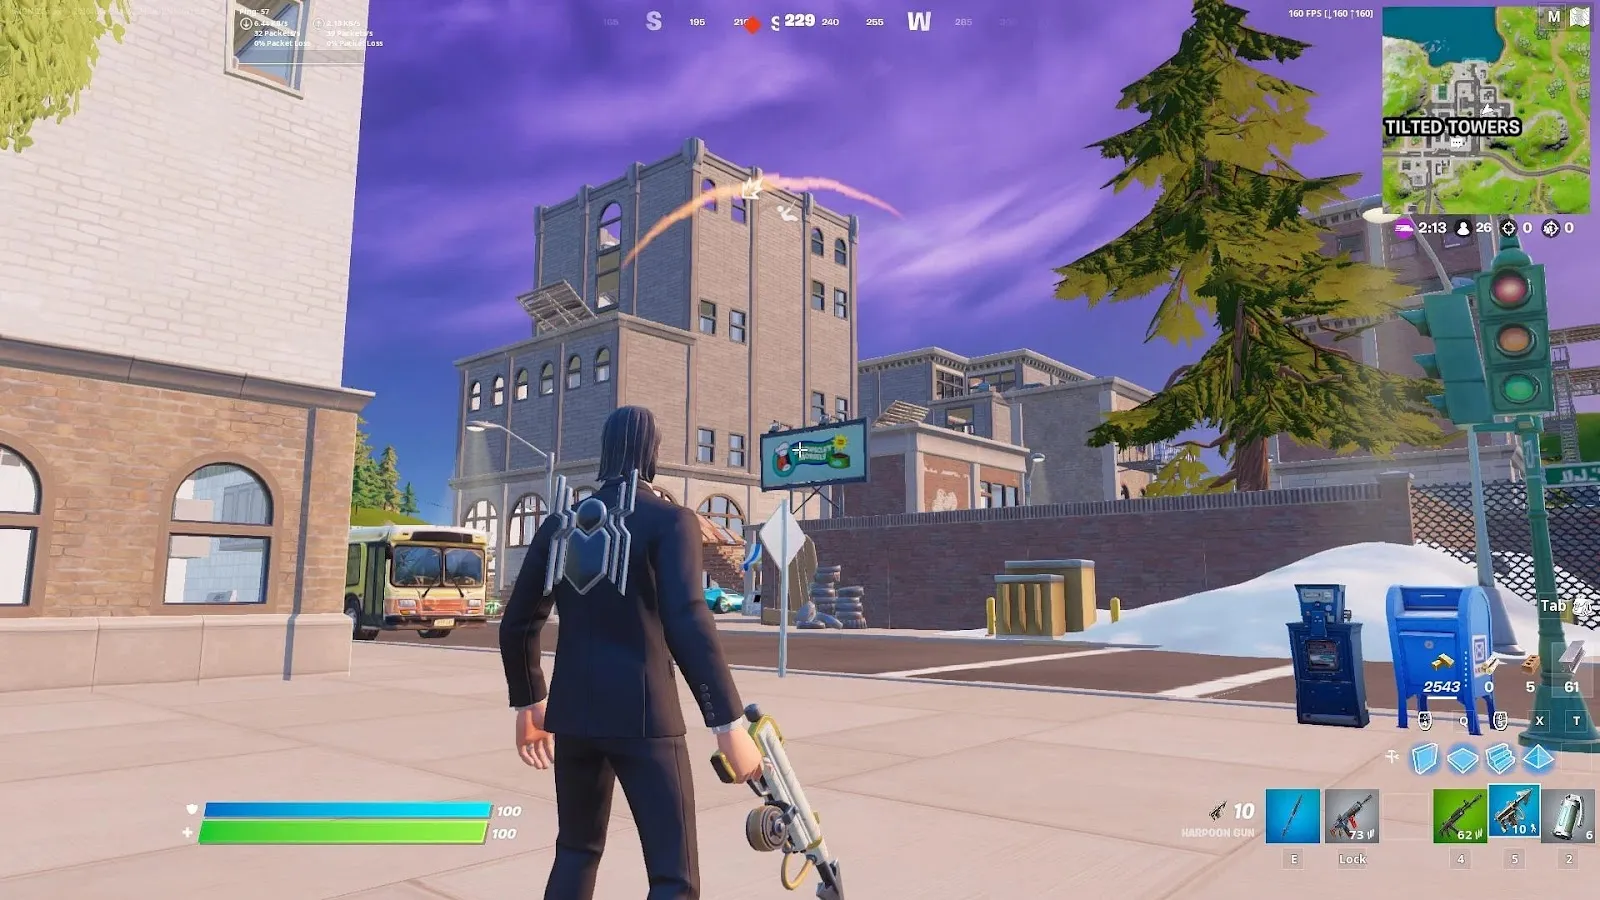 Tilted Towers Gameplay